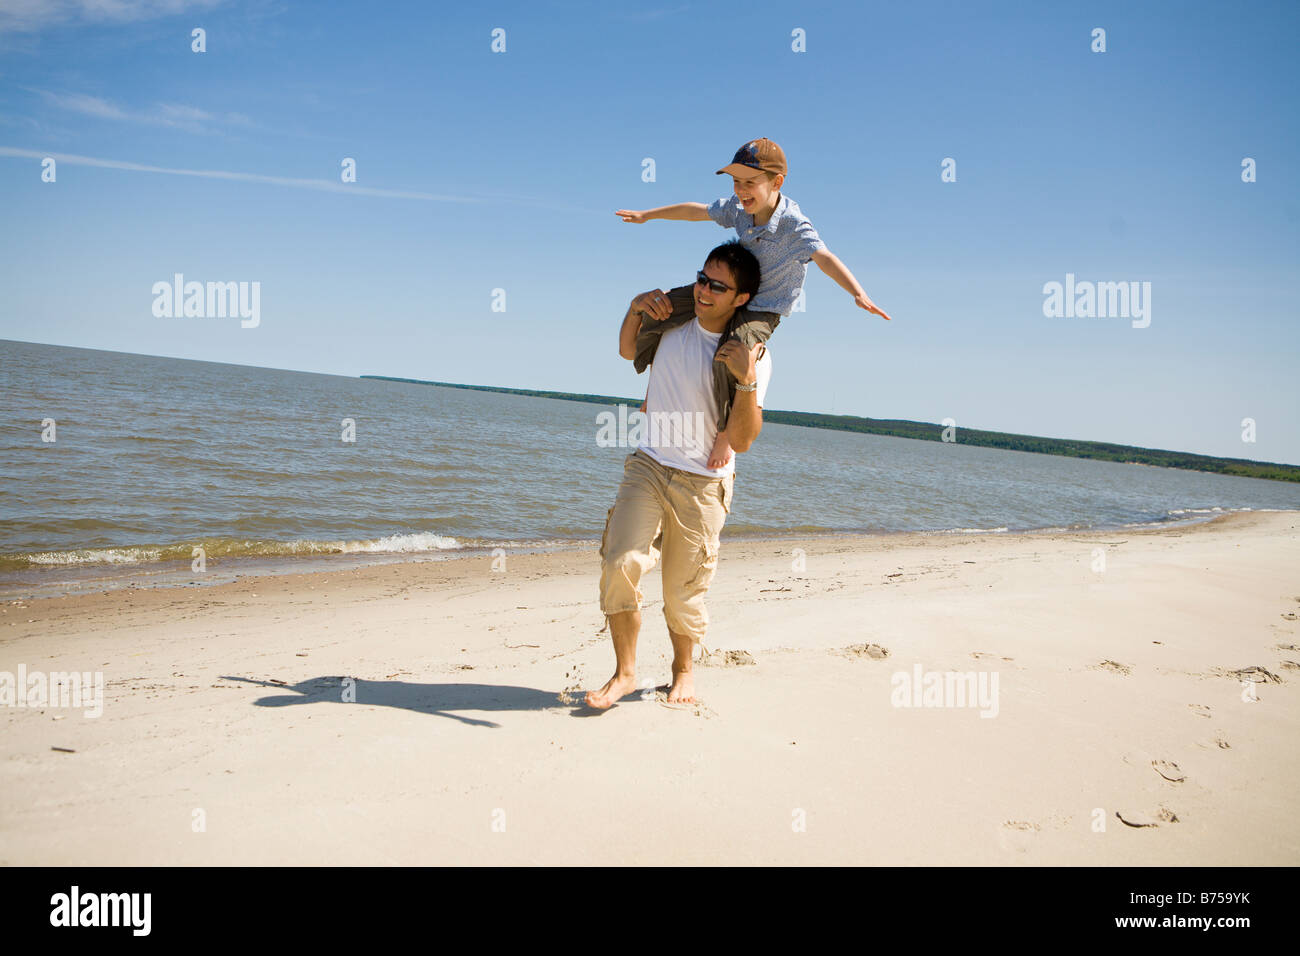 Man carries boy (7) on his shoulders as boy holds arms out, Grand Beach Provincial Park, Manitoba, Canada Stock Photo